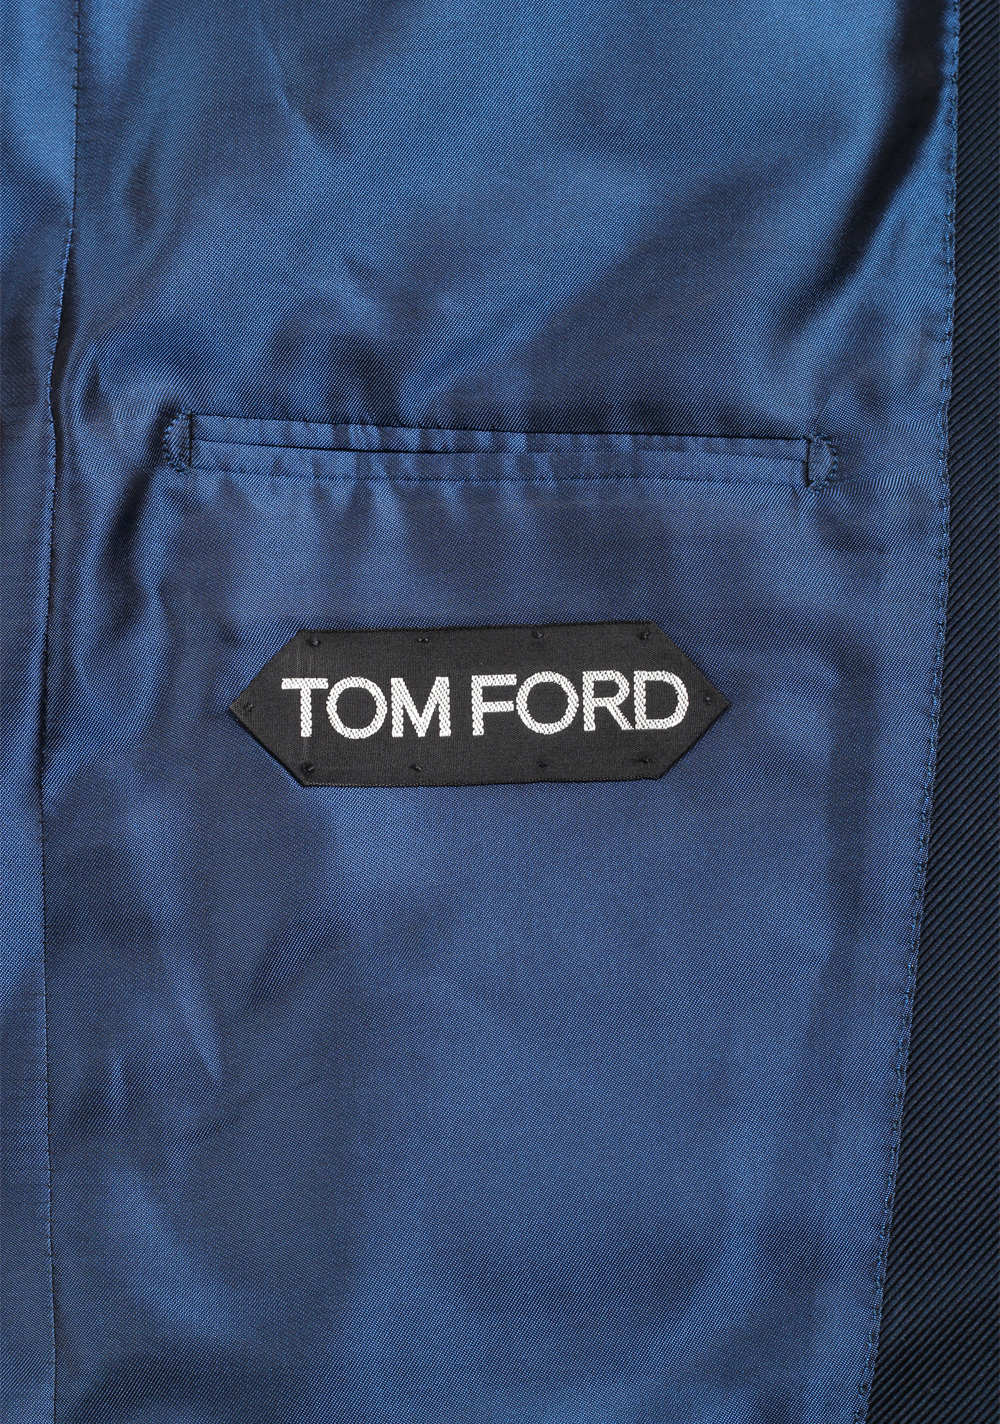 TOM FORD O’Connor Blue Tuxedo Suit Smoking Size 48C / 38S U.S. Fit Y In Mohair Cashmere | Costume Limité